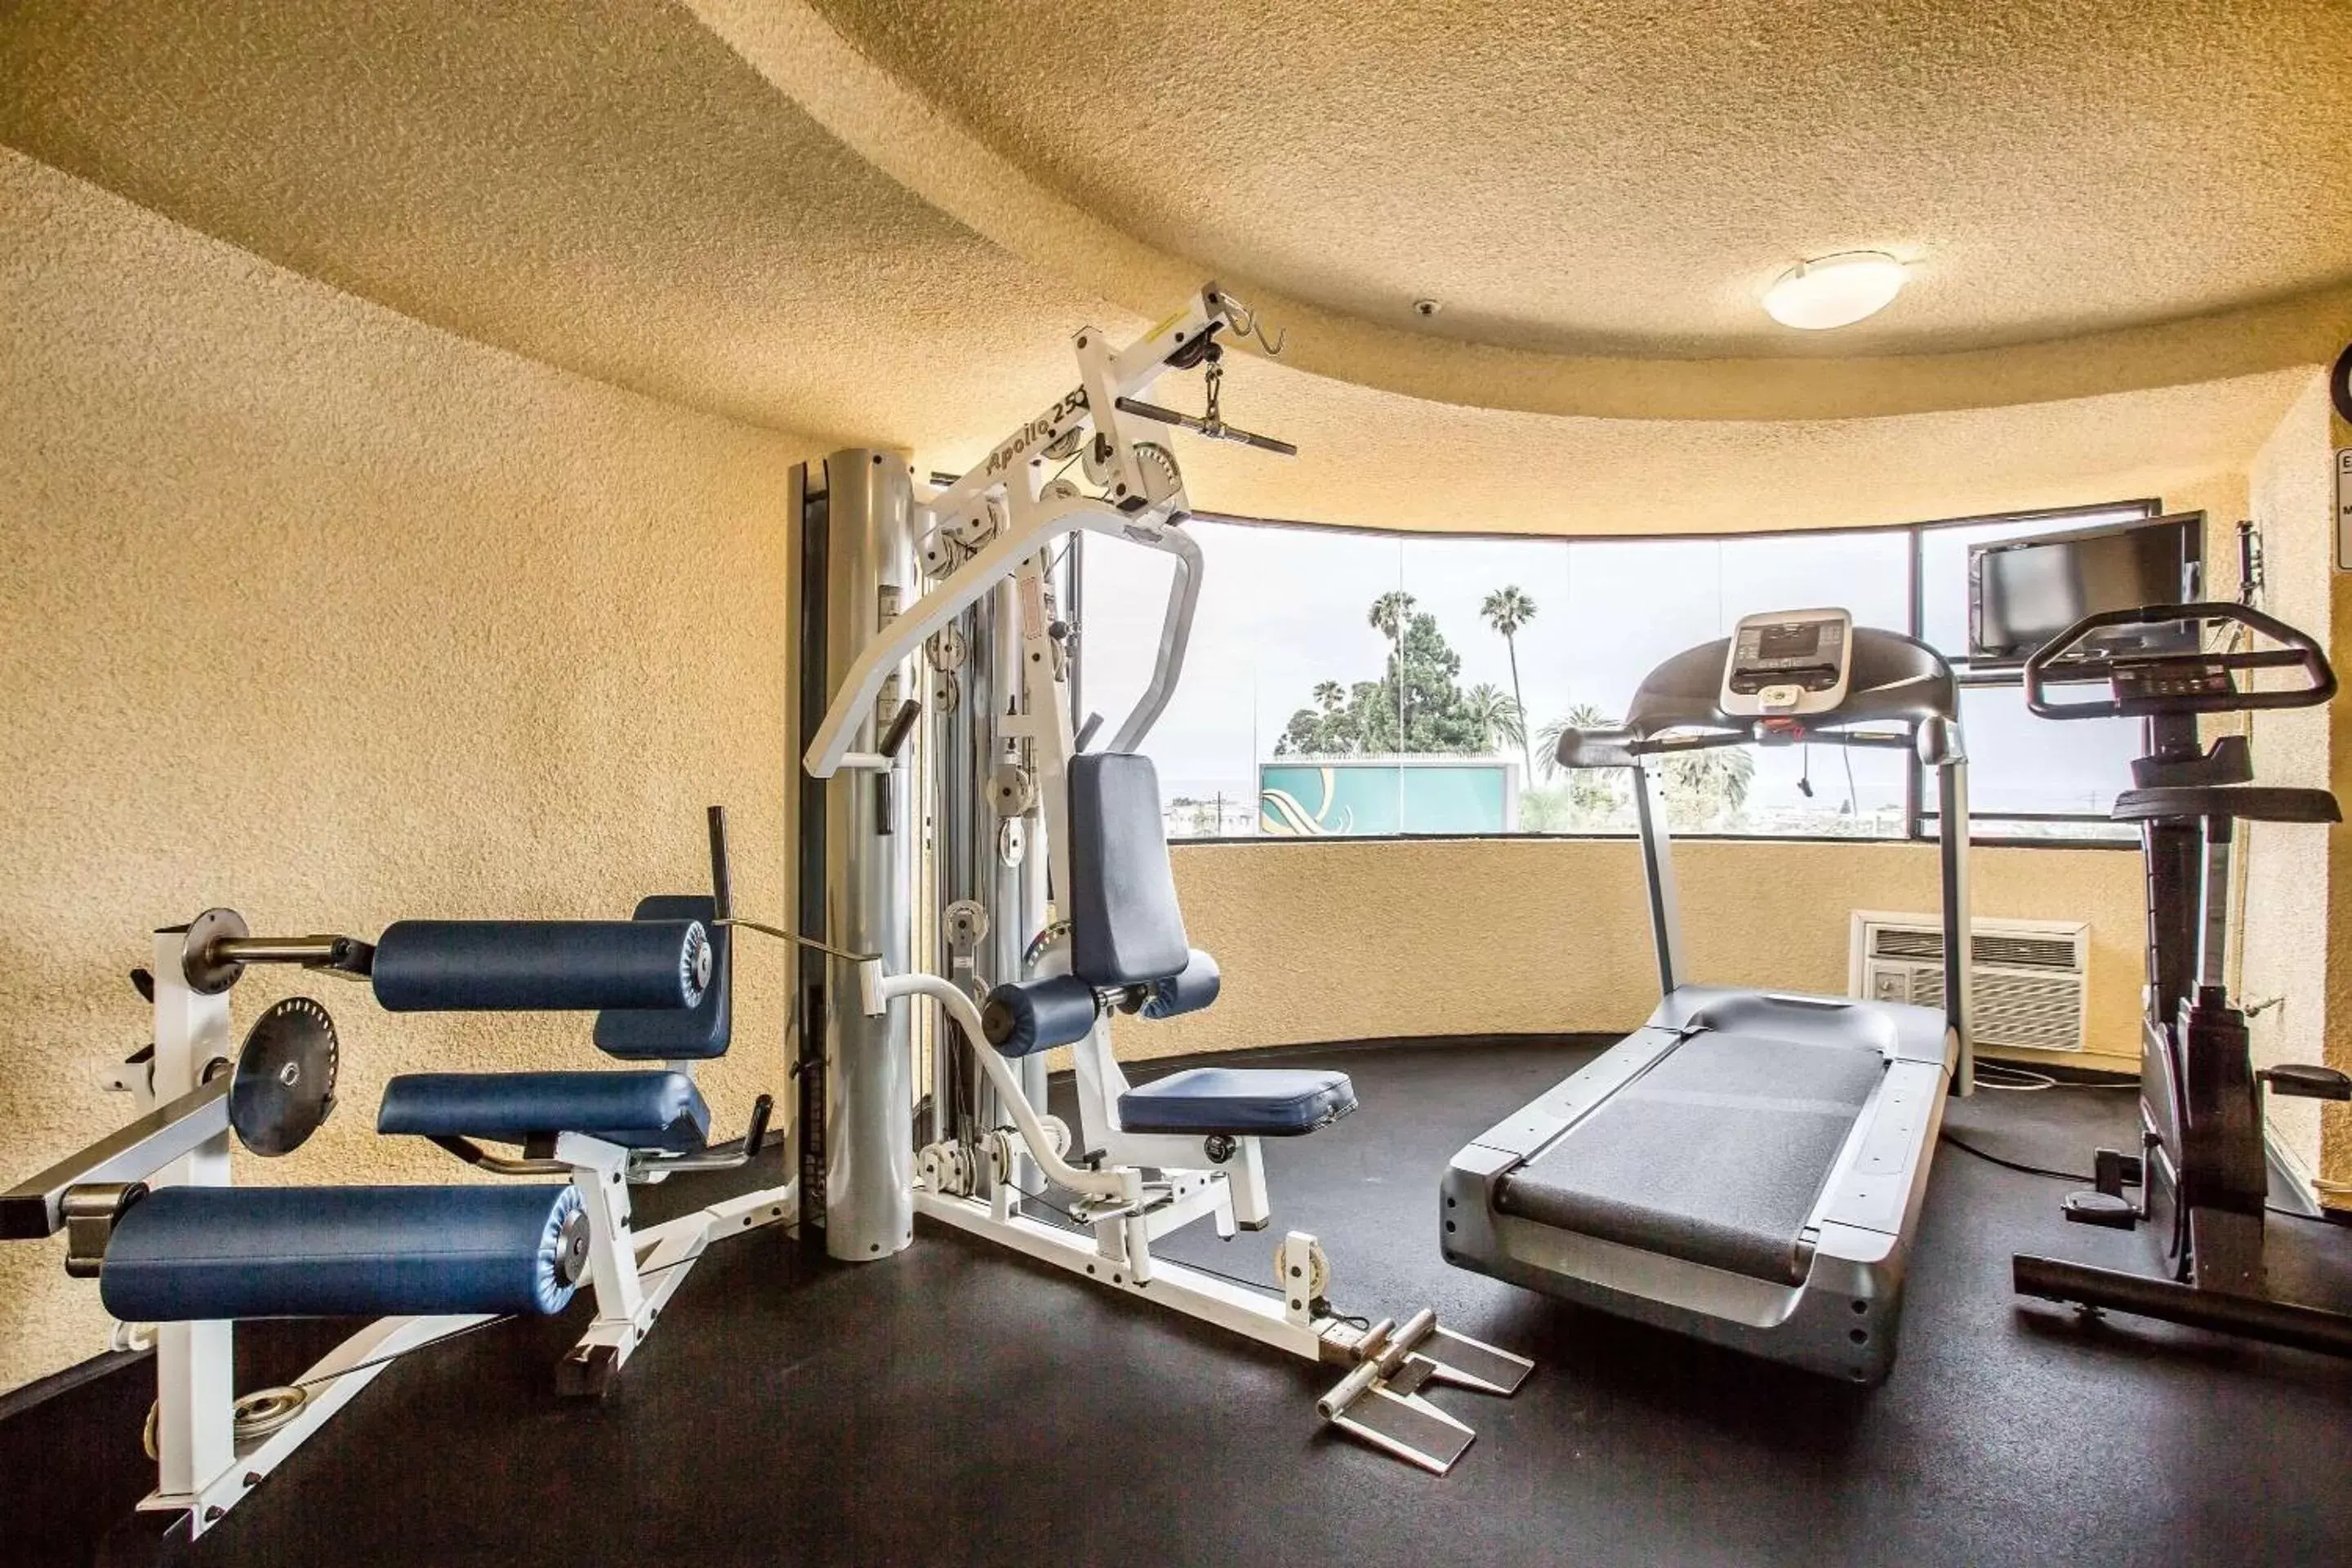 Fitness centre/facilities, Fitness Center/Facilities in Quality Inn & Suites Hermosa Beach